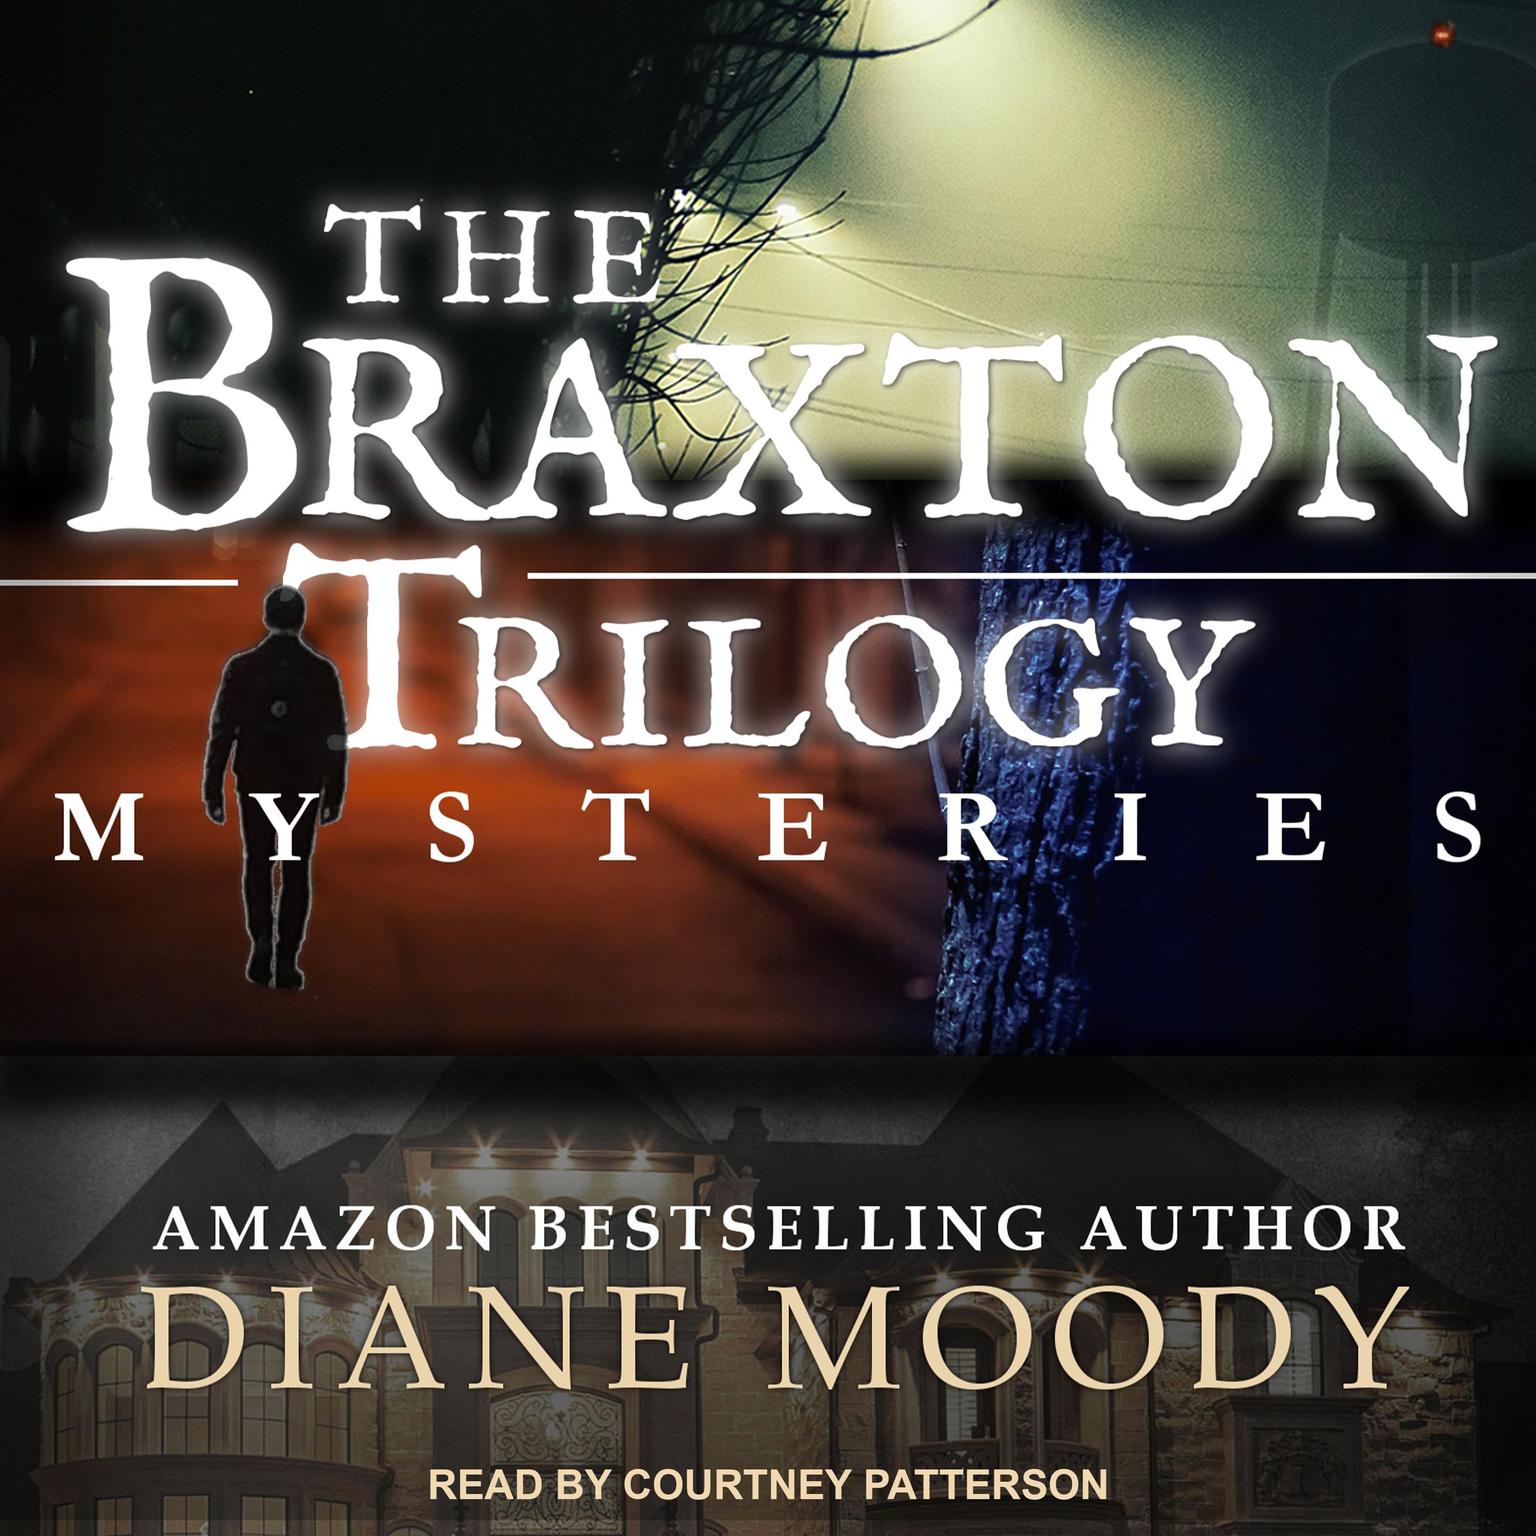 The Braxton Trilogy Mysteries Audiobook, by Diane Moody